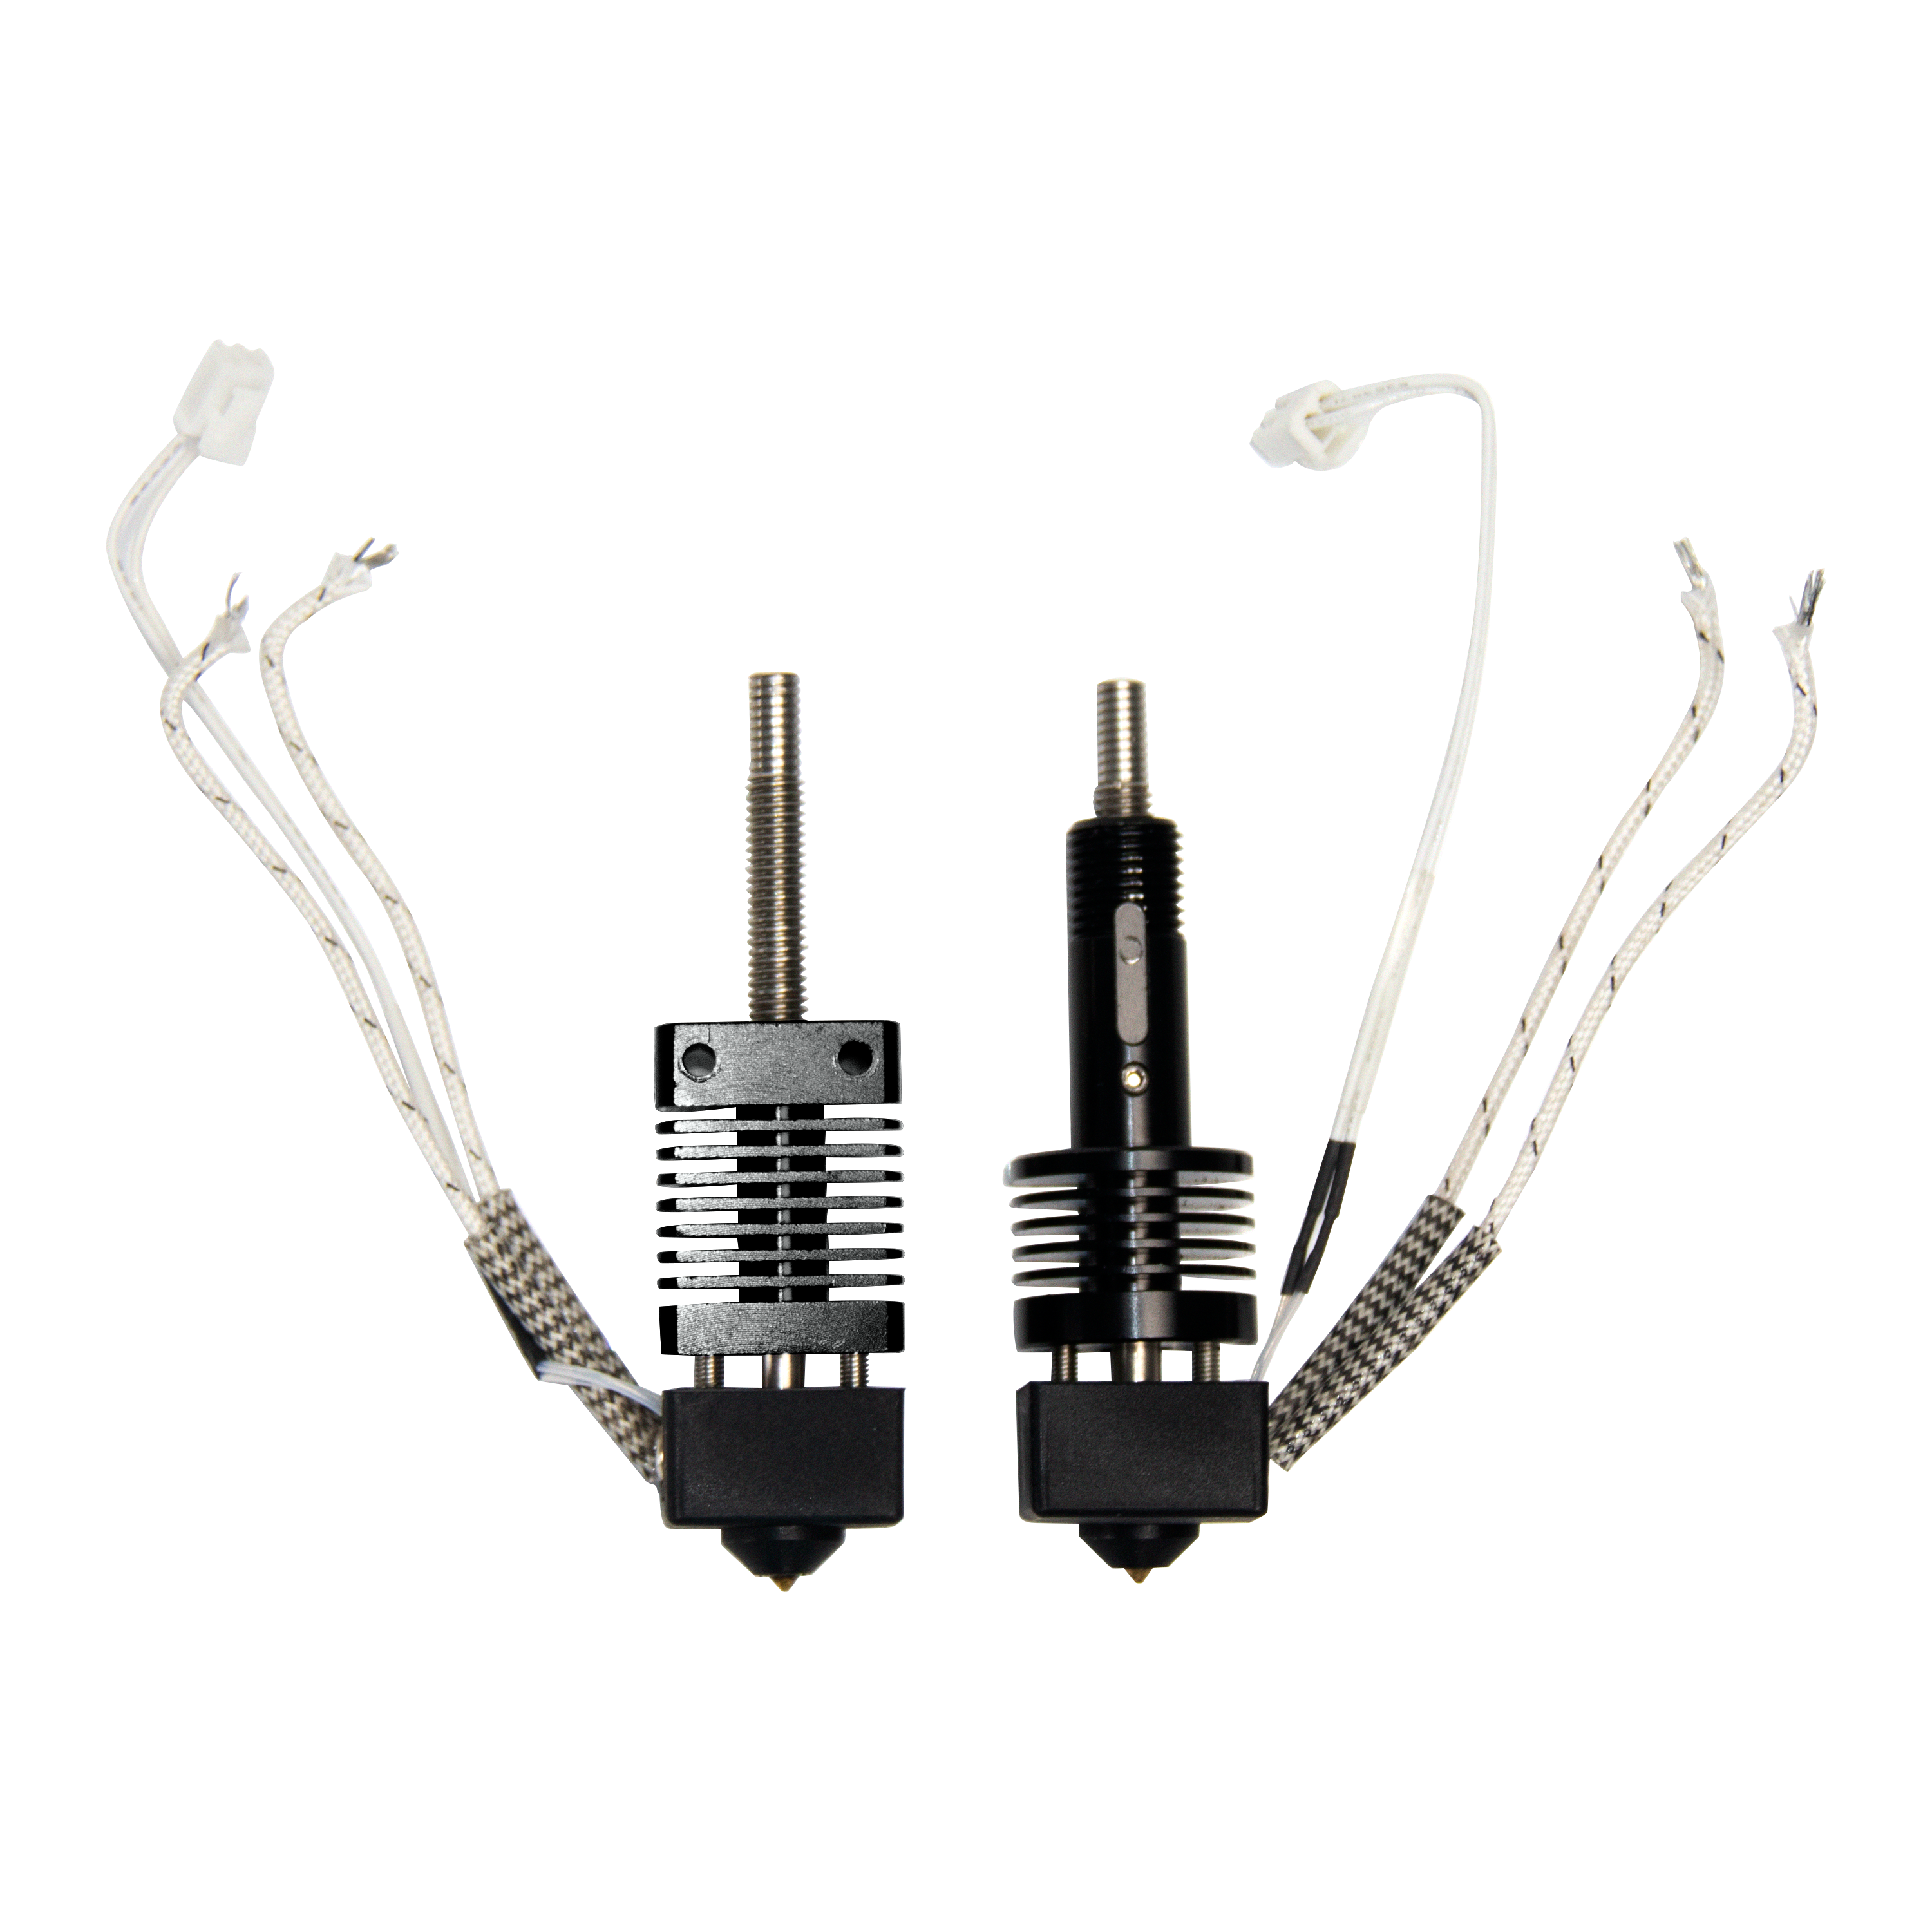 Quick Nozzle Replacement Kit (N1 N2)